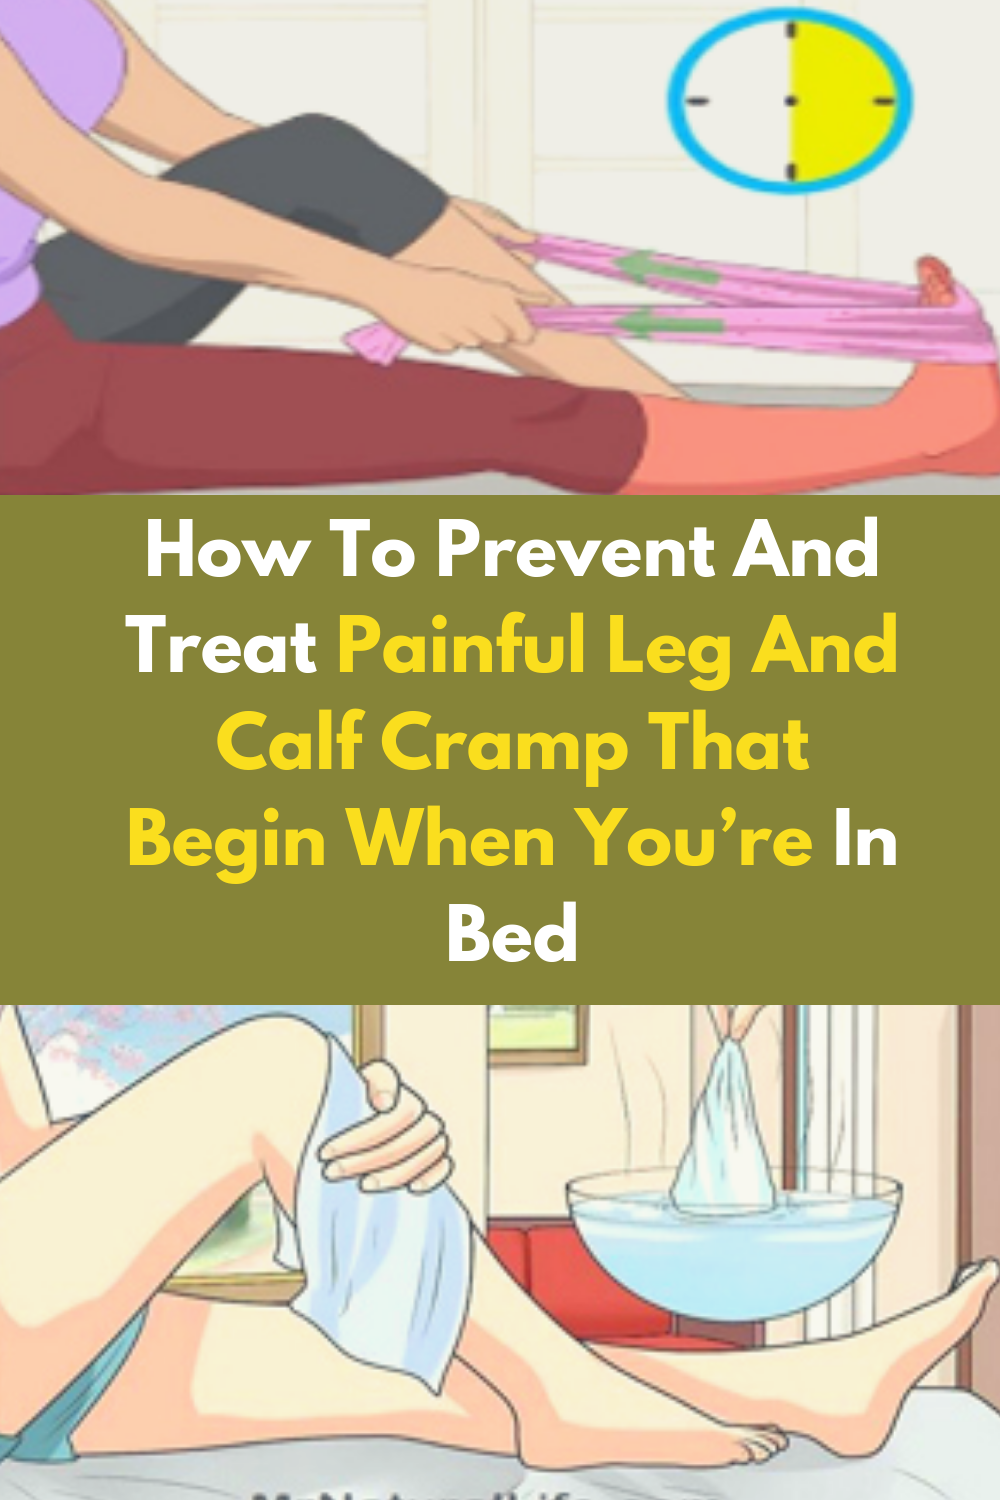 How To Prevent And Treat Painful Leg And Calf Cramp That ...